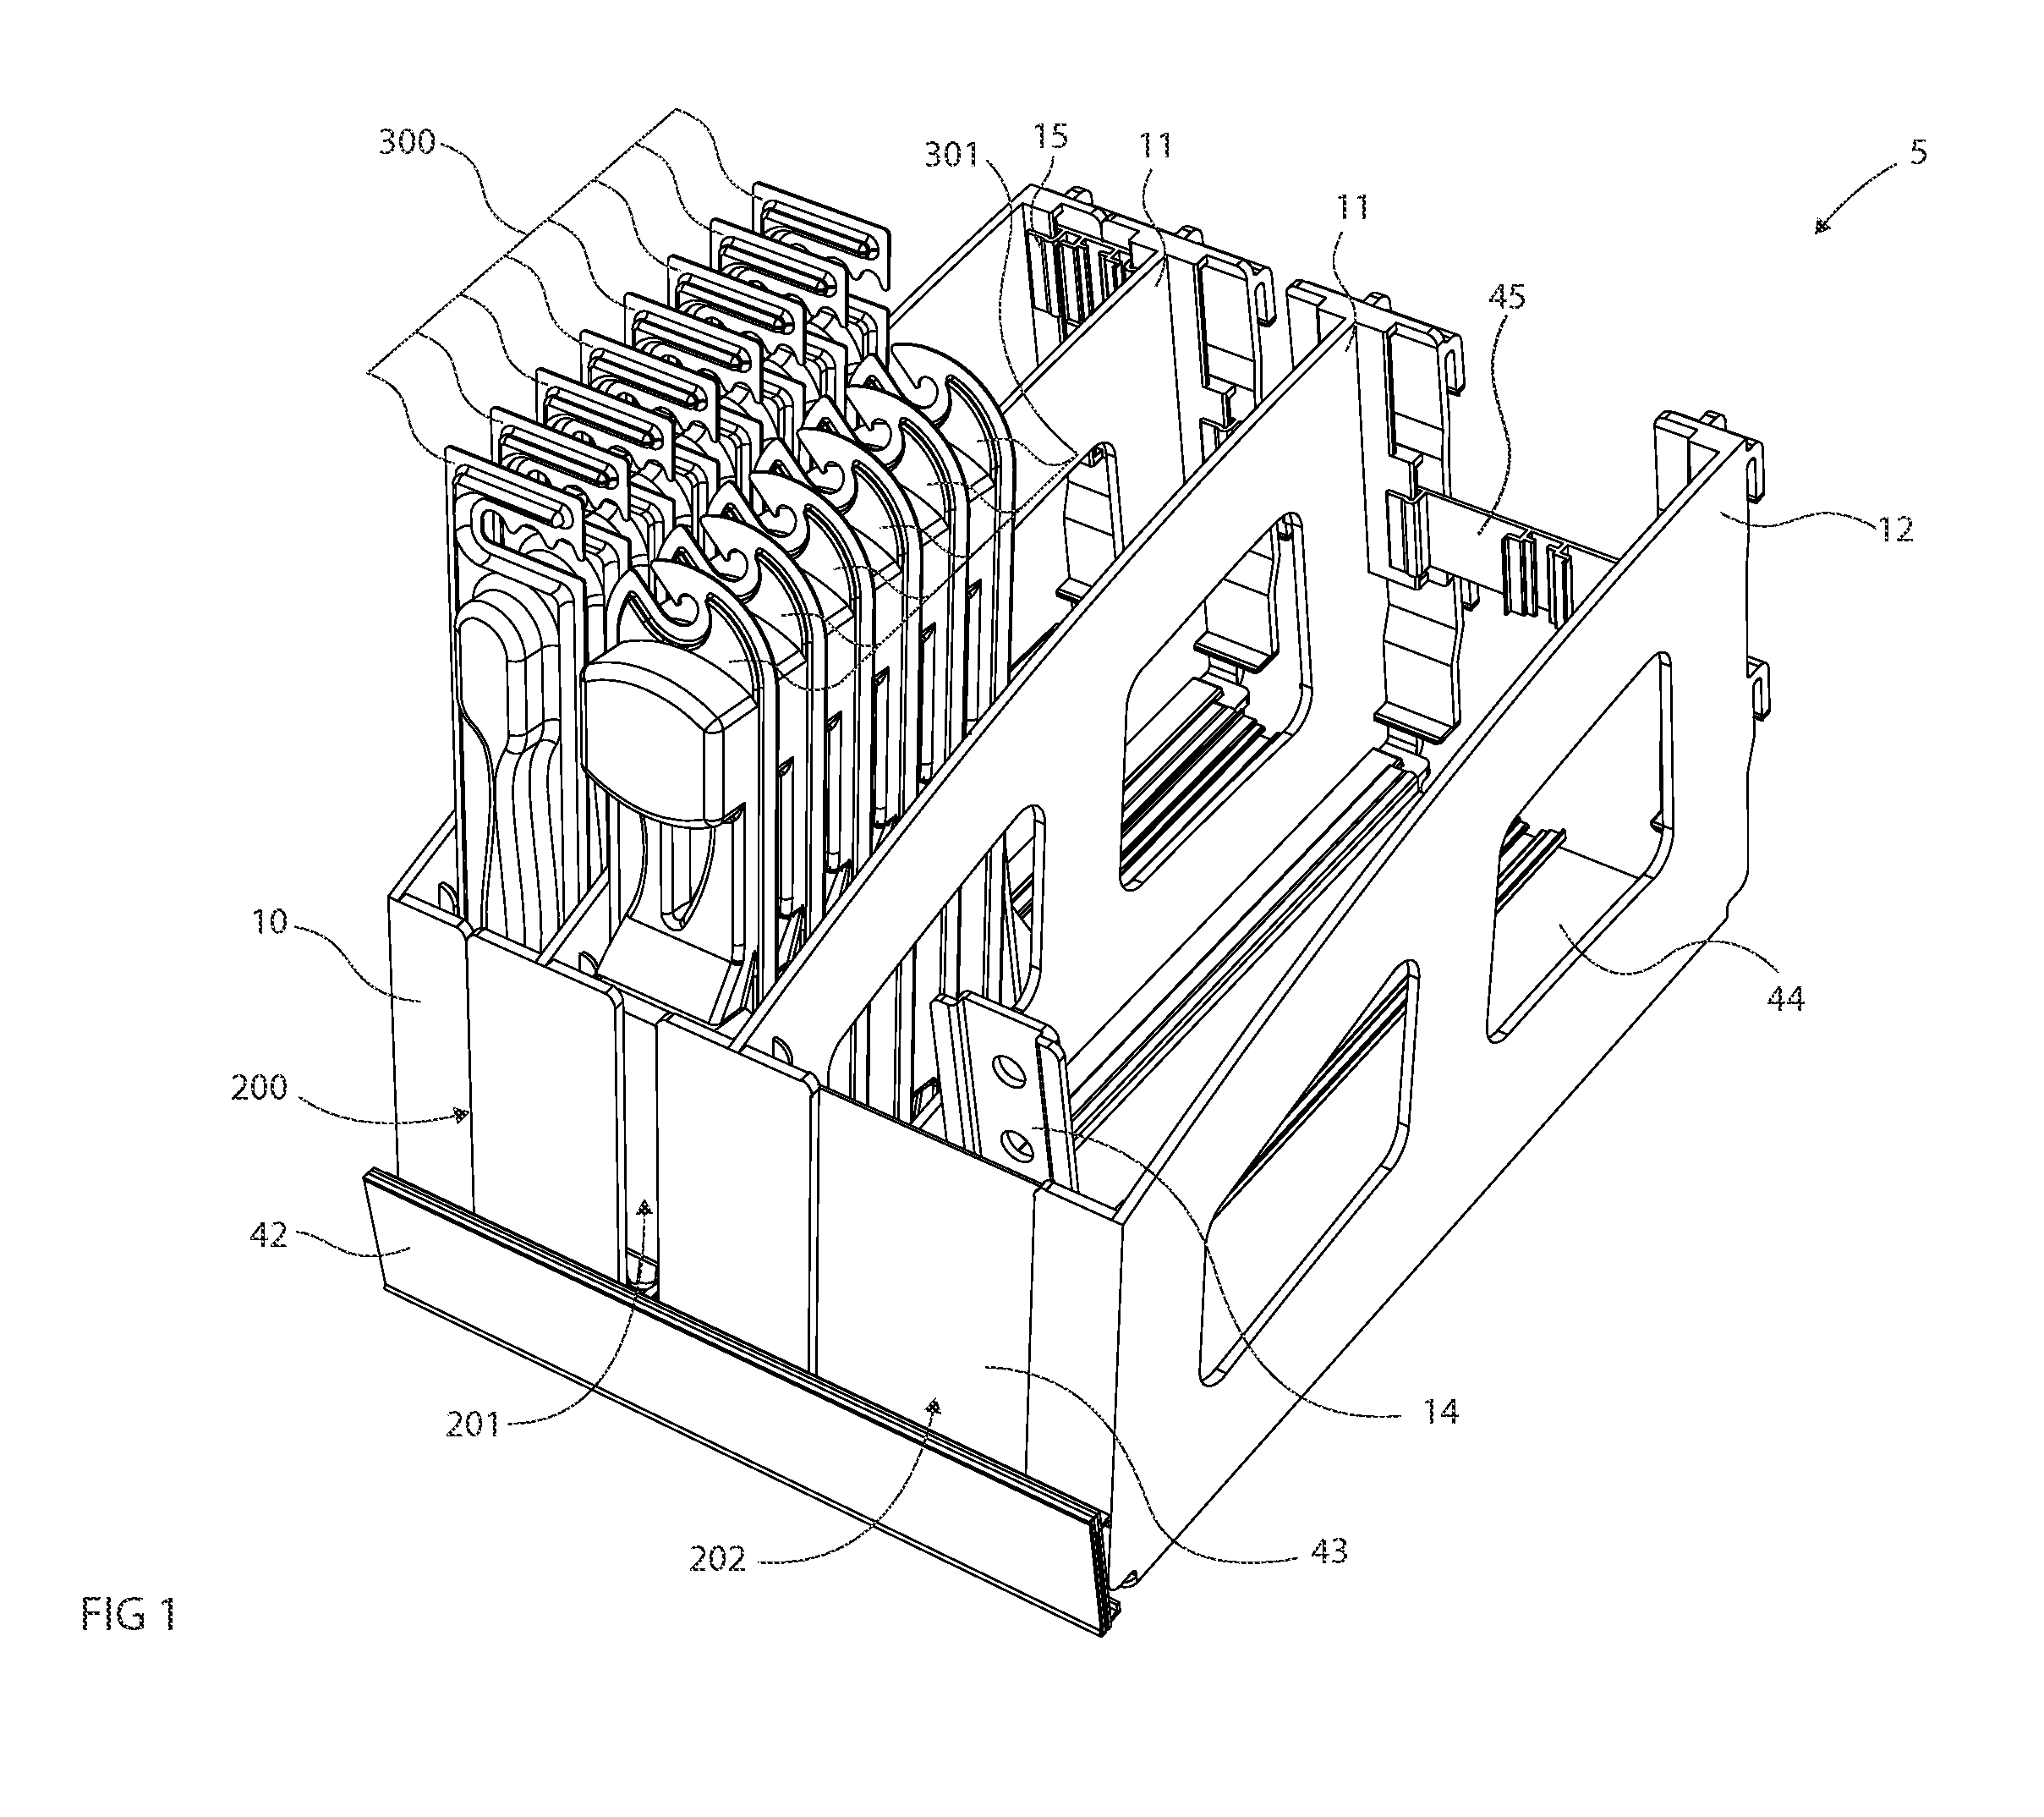 Hanging product divider and pusher systems and methods for dividing, pushing and/or dispensing one or more retail products